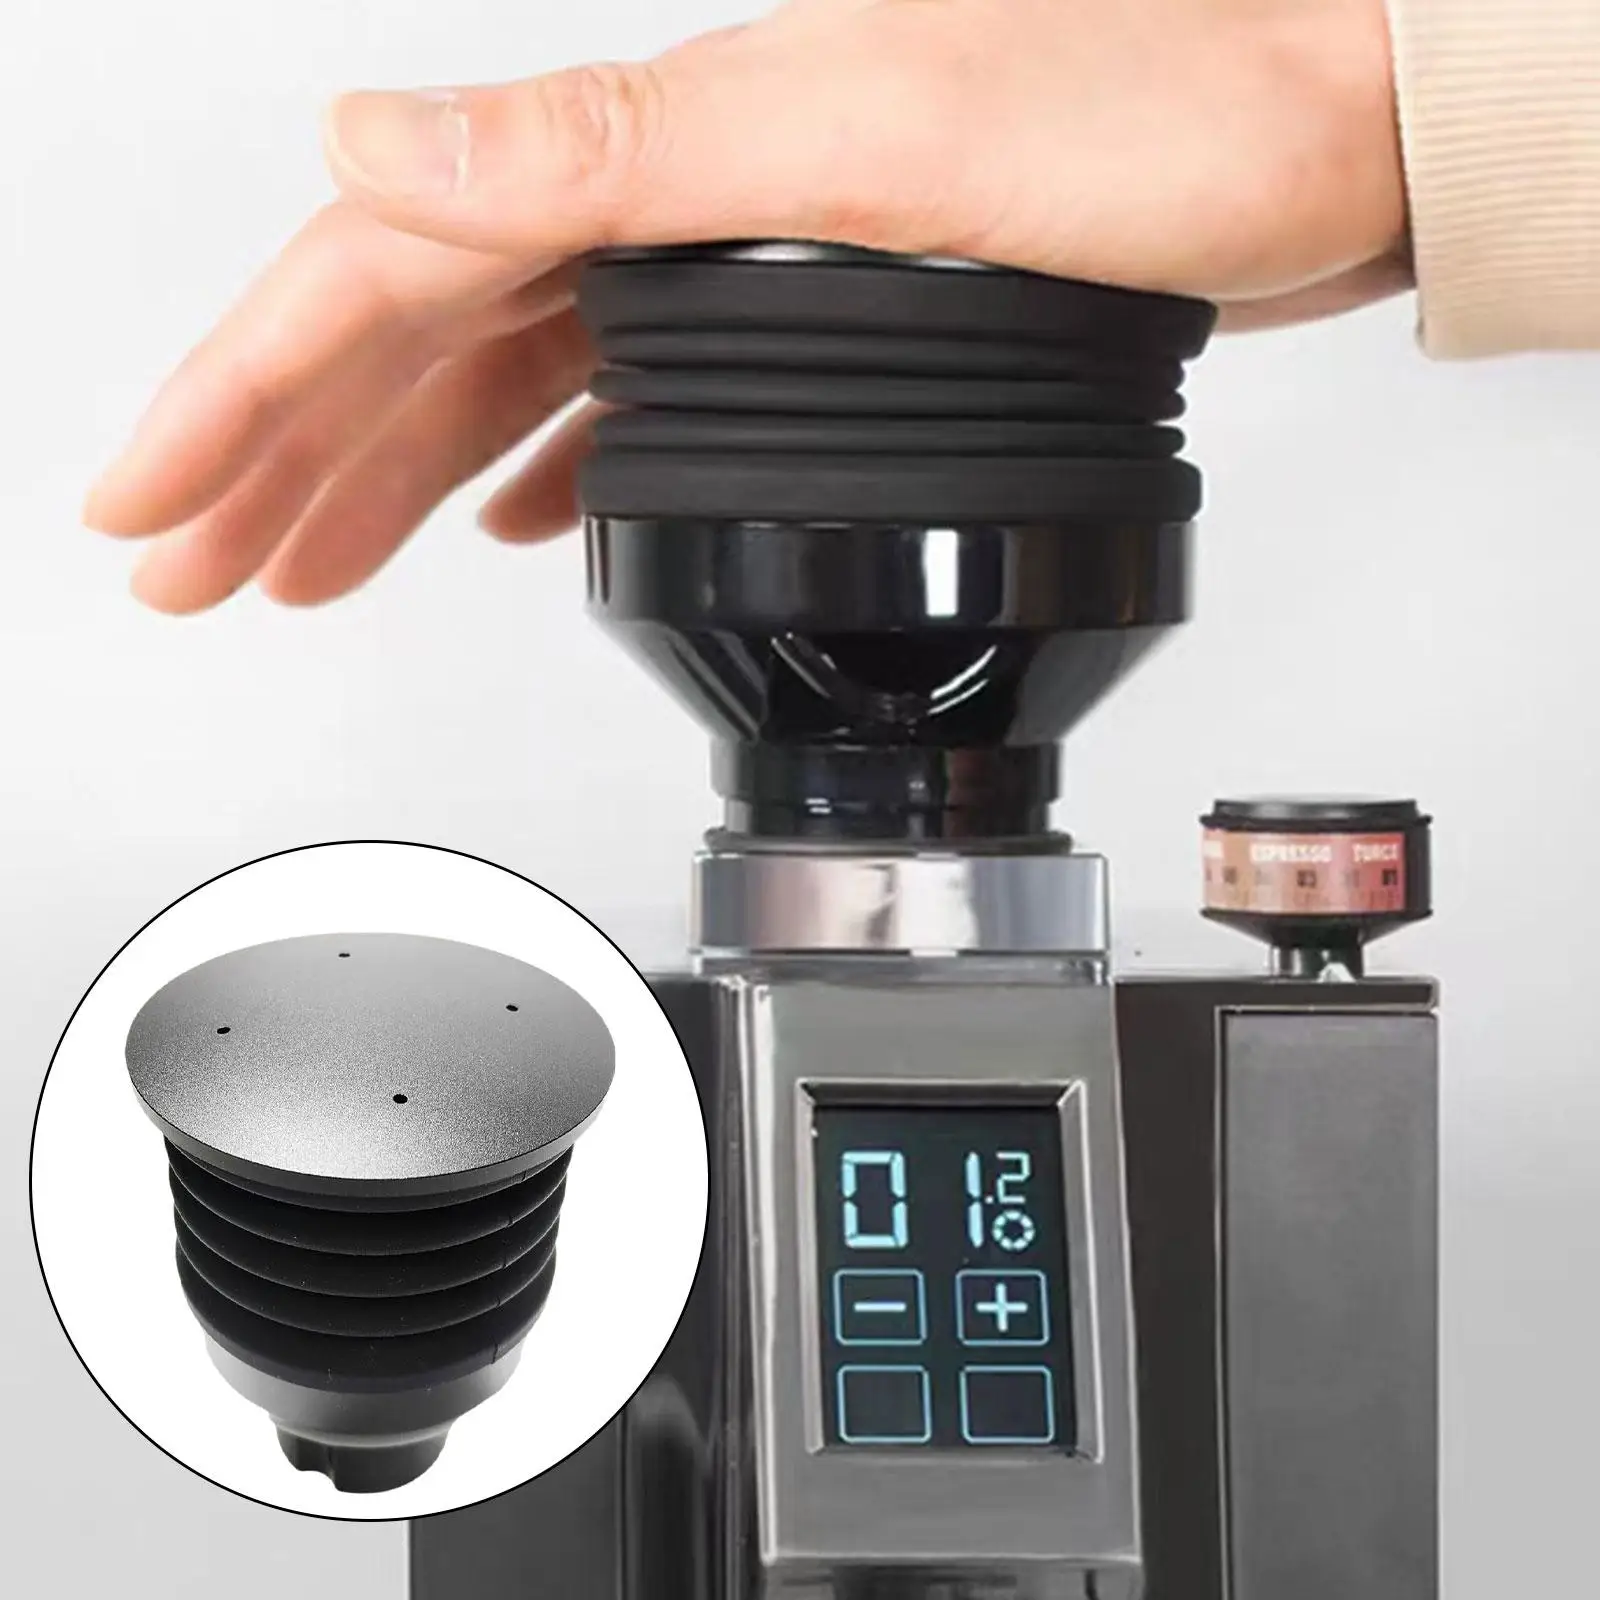 Grinder Blowing Bean Bin Reusable Grinder Single Dose Grinder Cleaning Tool Accessory Replacement Parts Coffee Machine